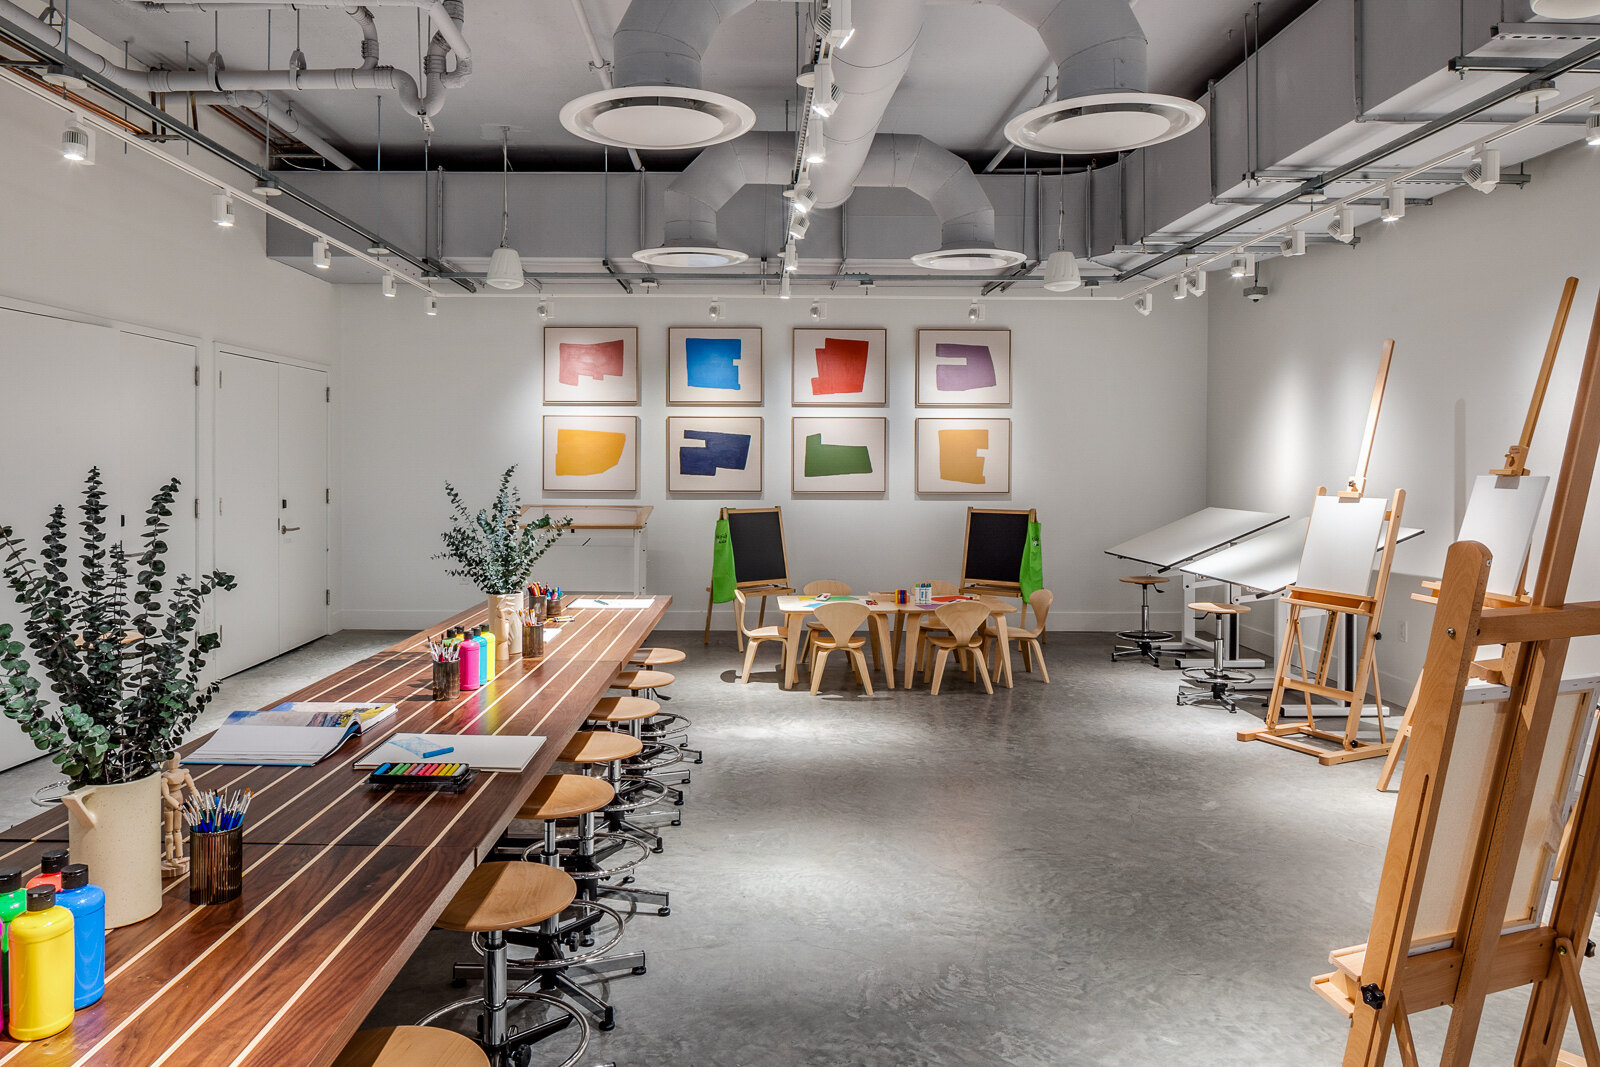 A modern and bright art studio with easels, a long worktable with art supplies, and colorful artwork displayed on the wall.